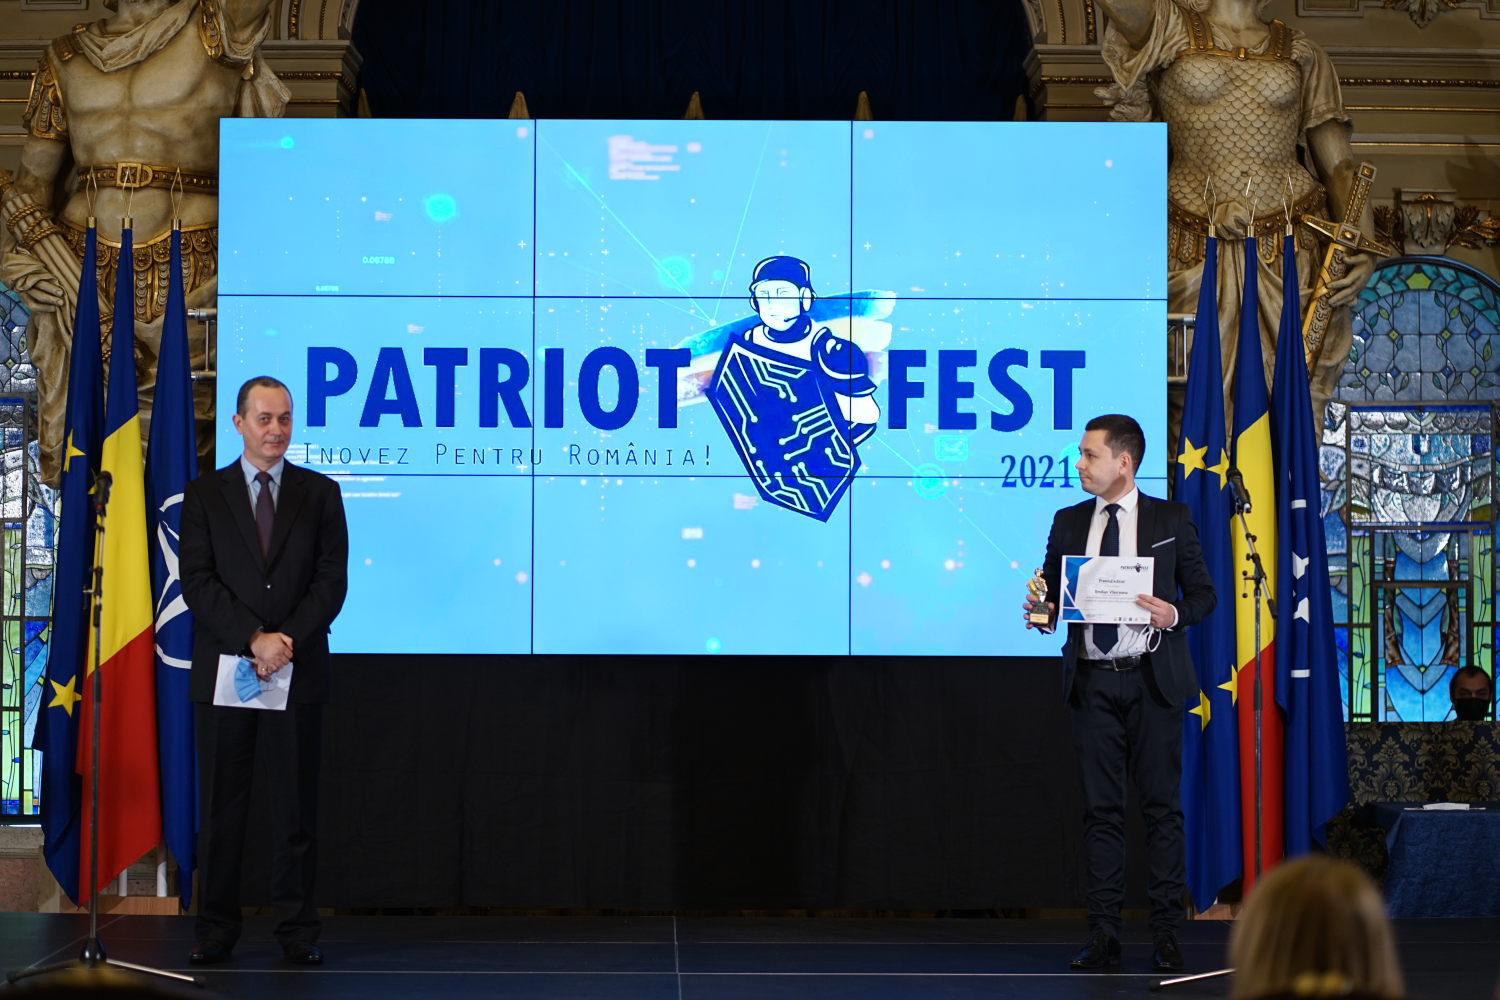 The National Contest PatriotFest Gala – The Fourth Edition